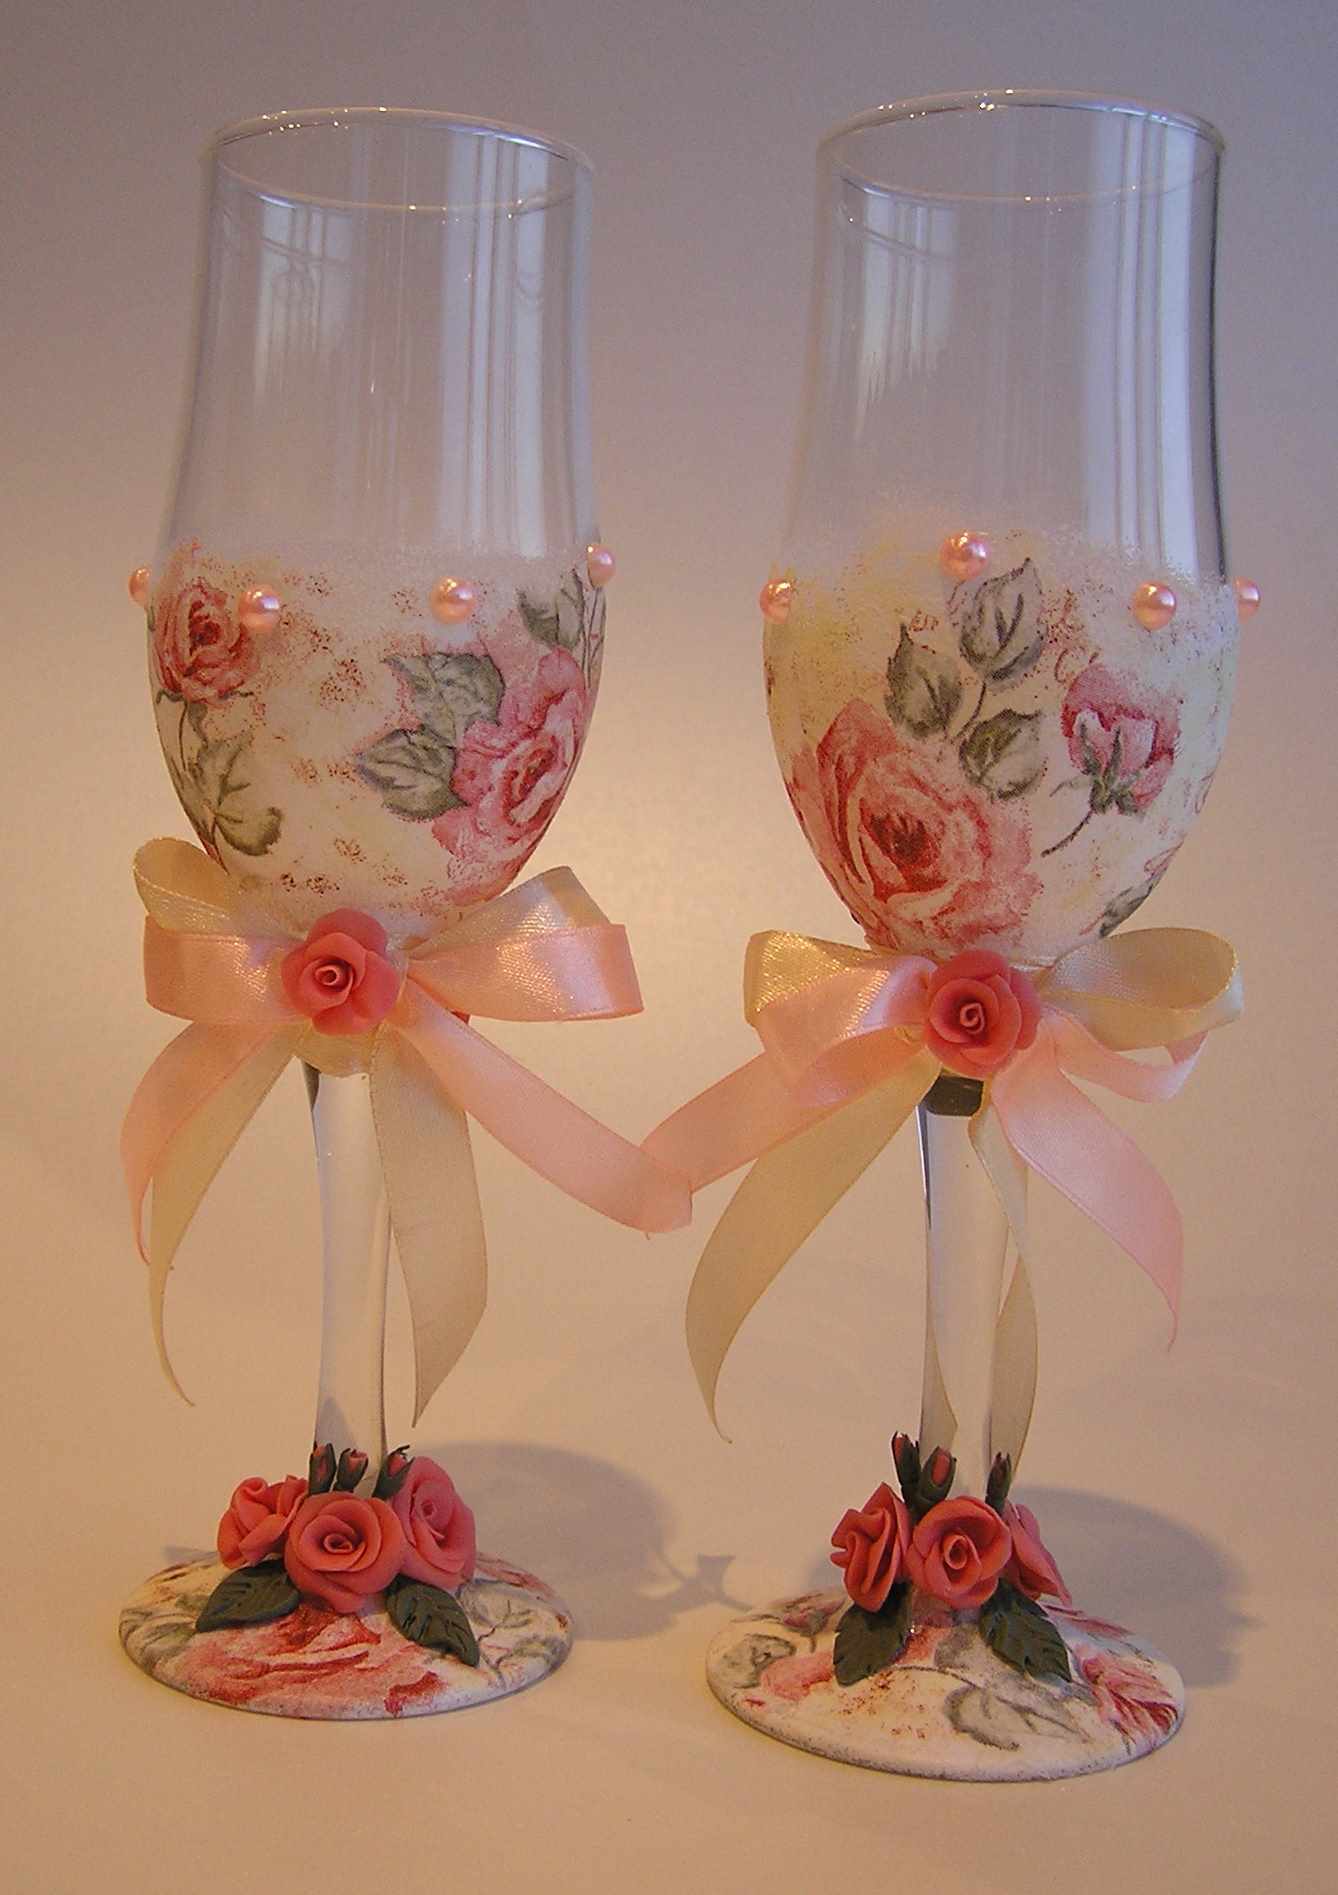 An example of a beautiful design of the design of wedding glasses